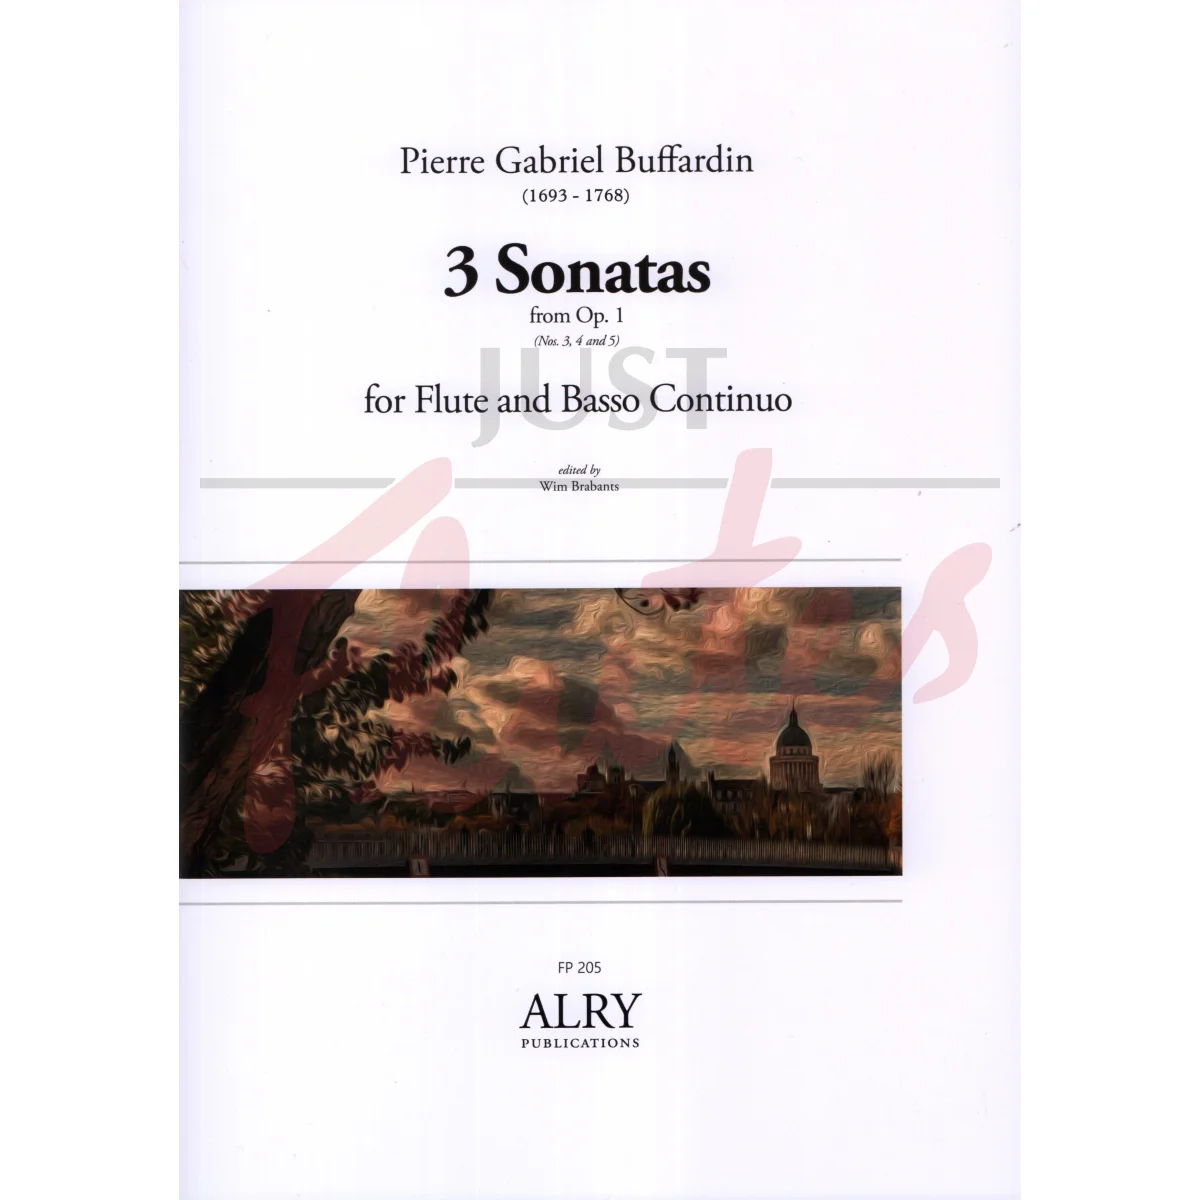 3 Sonatas from Op. 1 for Flute and Basso Continuo